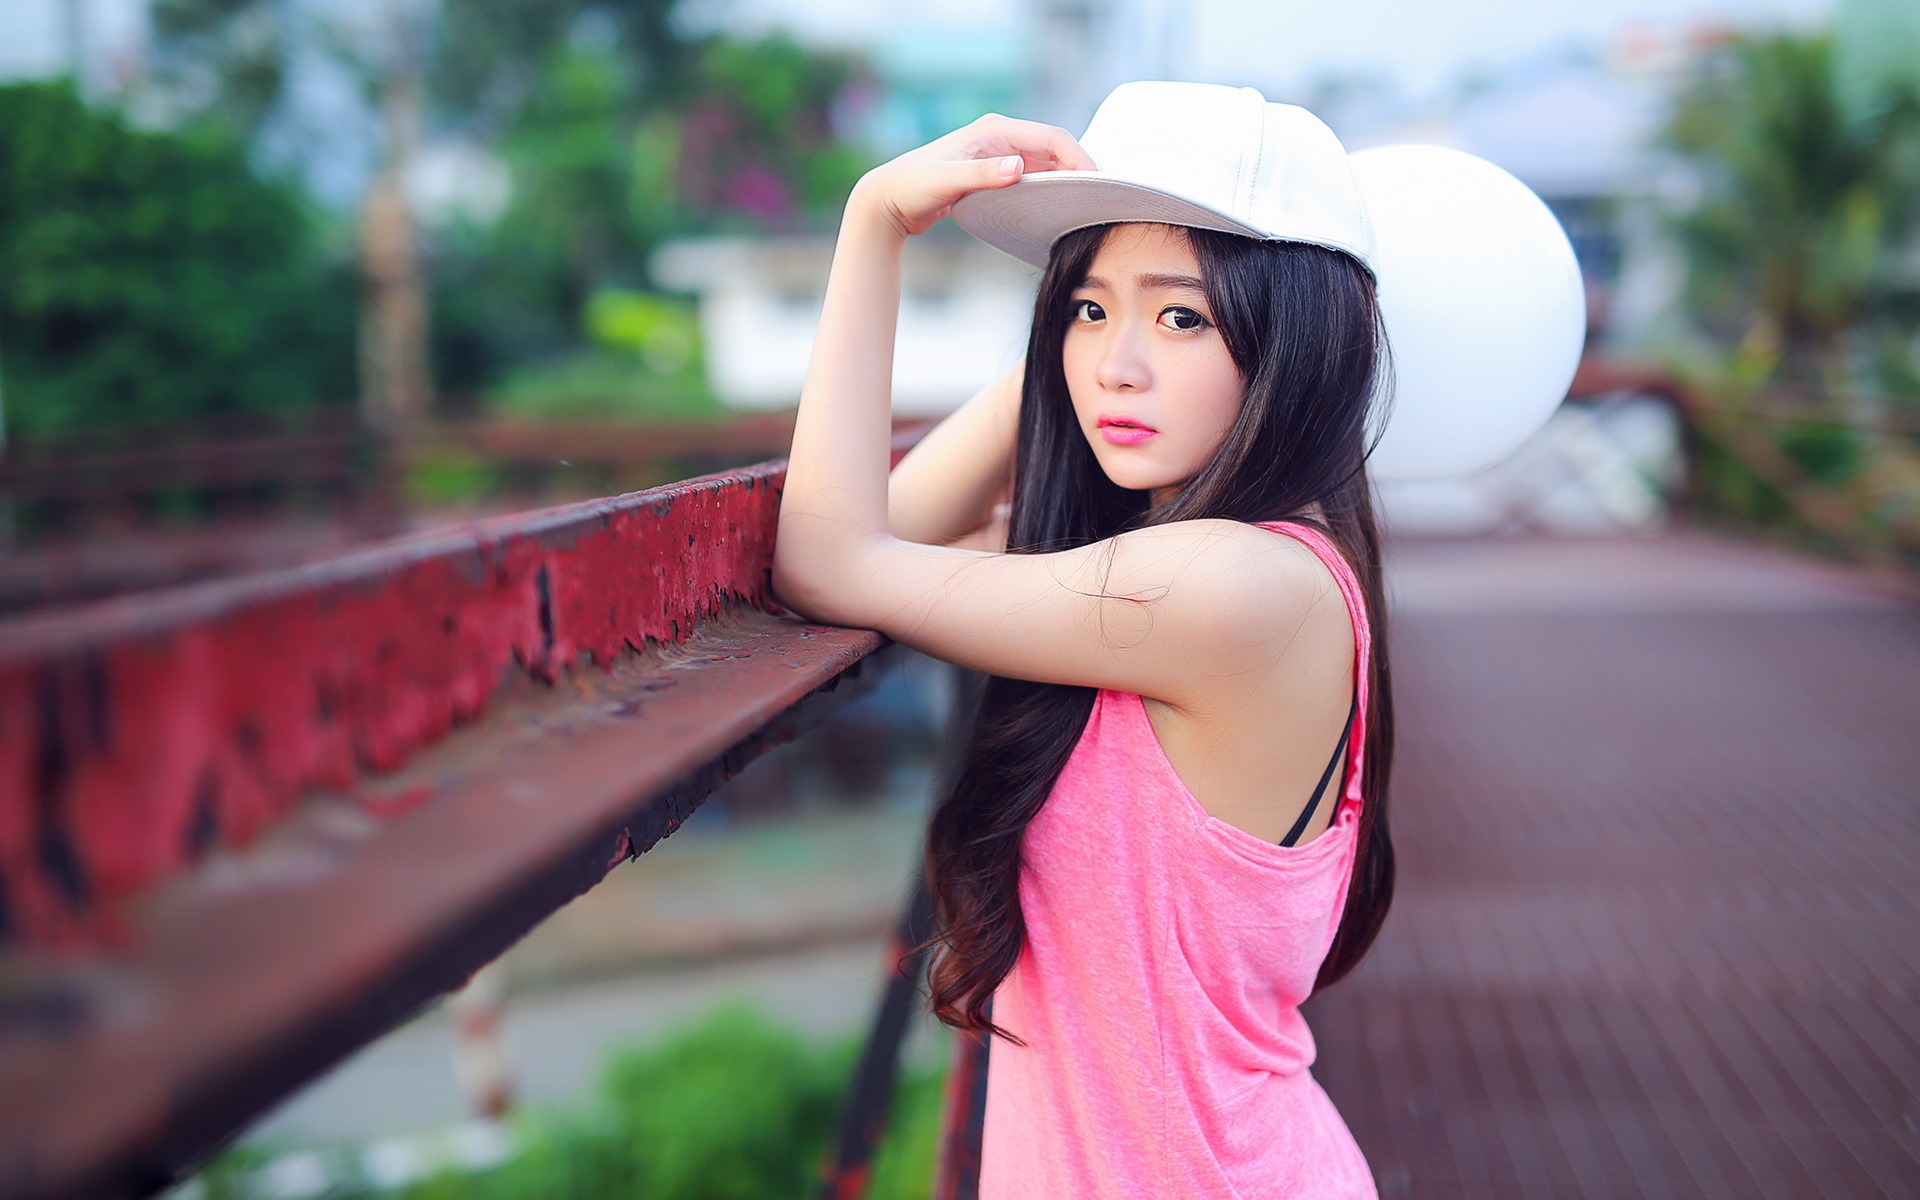 Pure and lovely young Asian girl HD wallpapers collection (1) #3 - 1920x1200